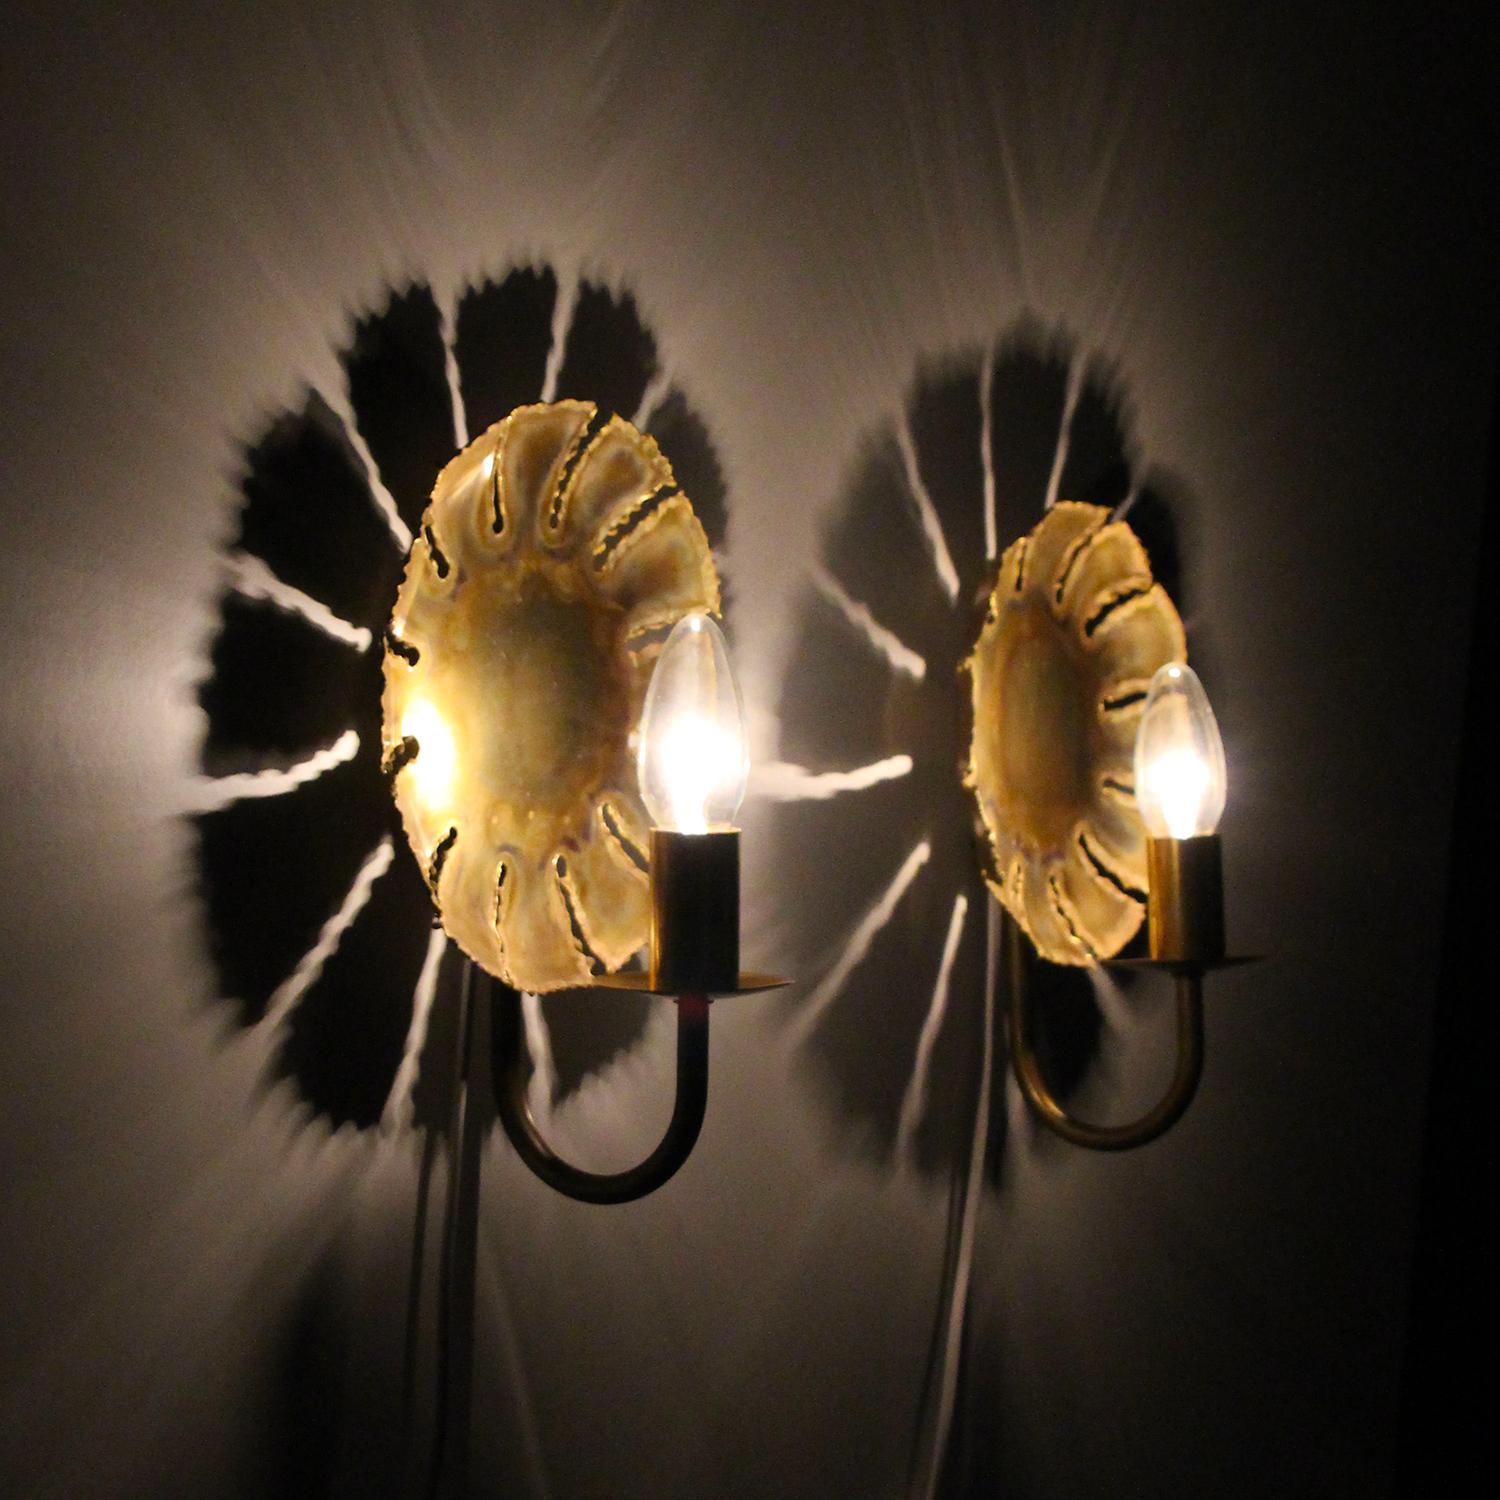 TYPE 5218 pair of Brutalist style brass wall lamps by Svend Aage Holm Sørensen, 1960s - beautiful midcentury pieces in excellent vintage condition.

A pair of brass sconces with all the iconic Holm Sørensen signs - made in flame treated brass with